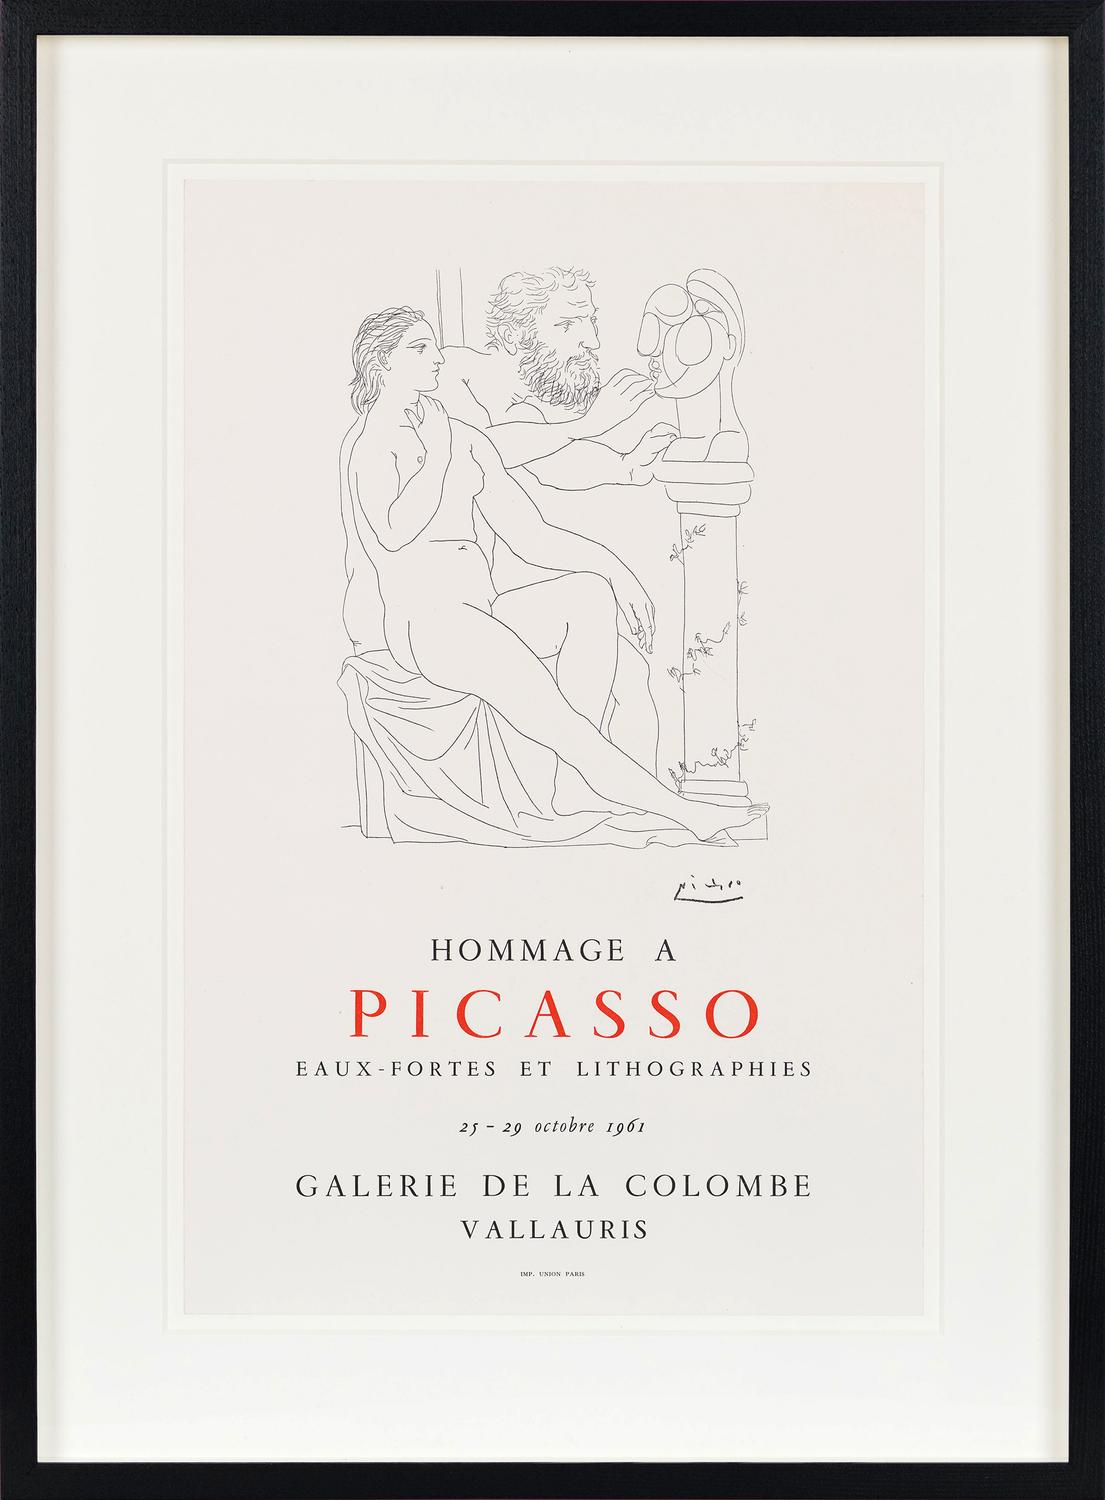 Hommage a Picasso, 1961